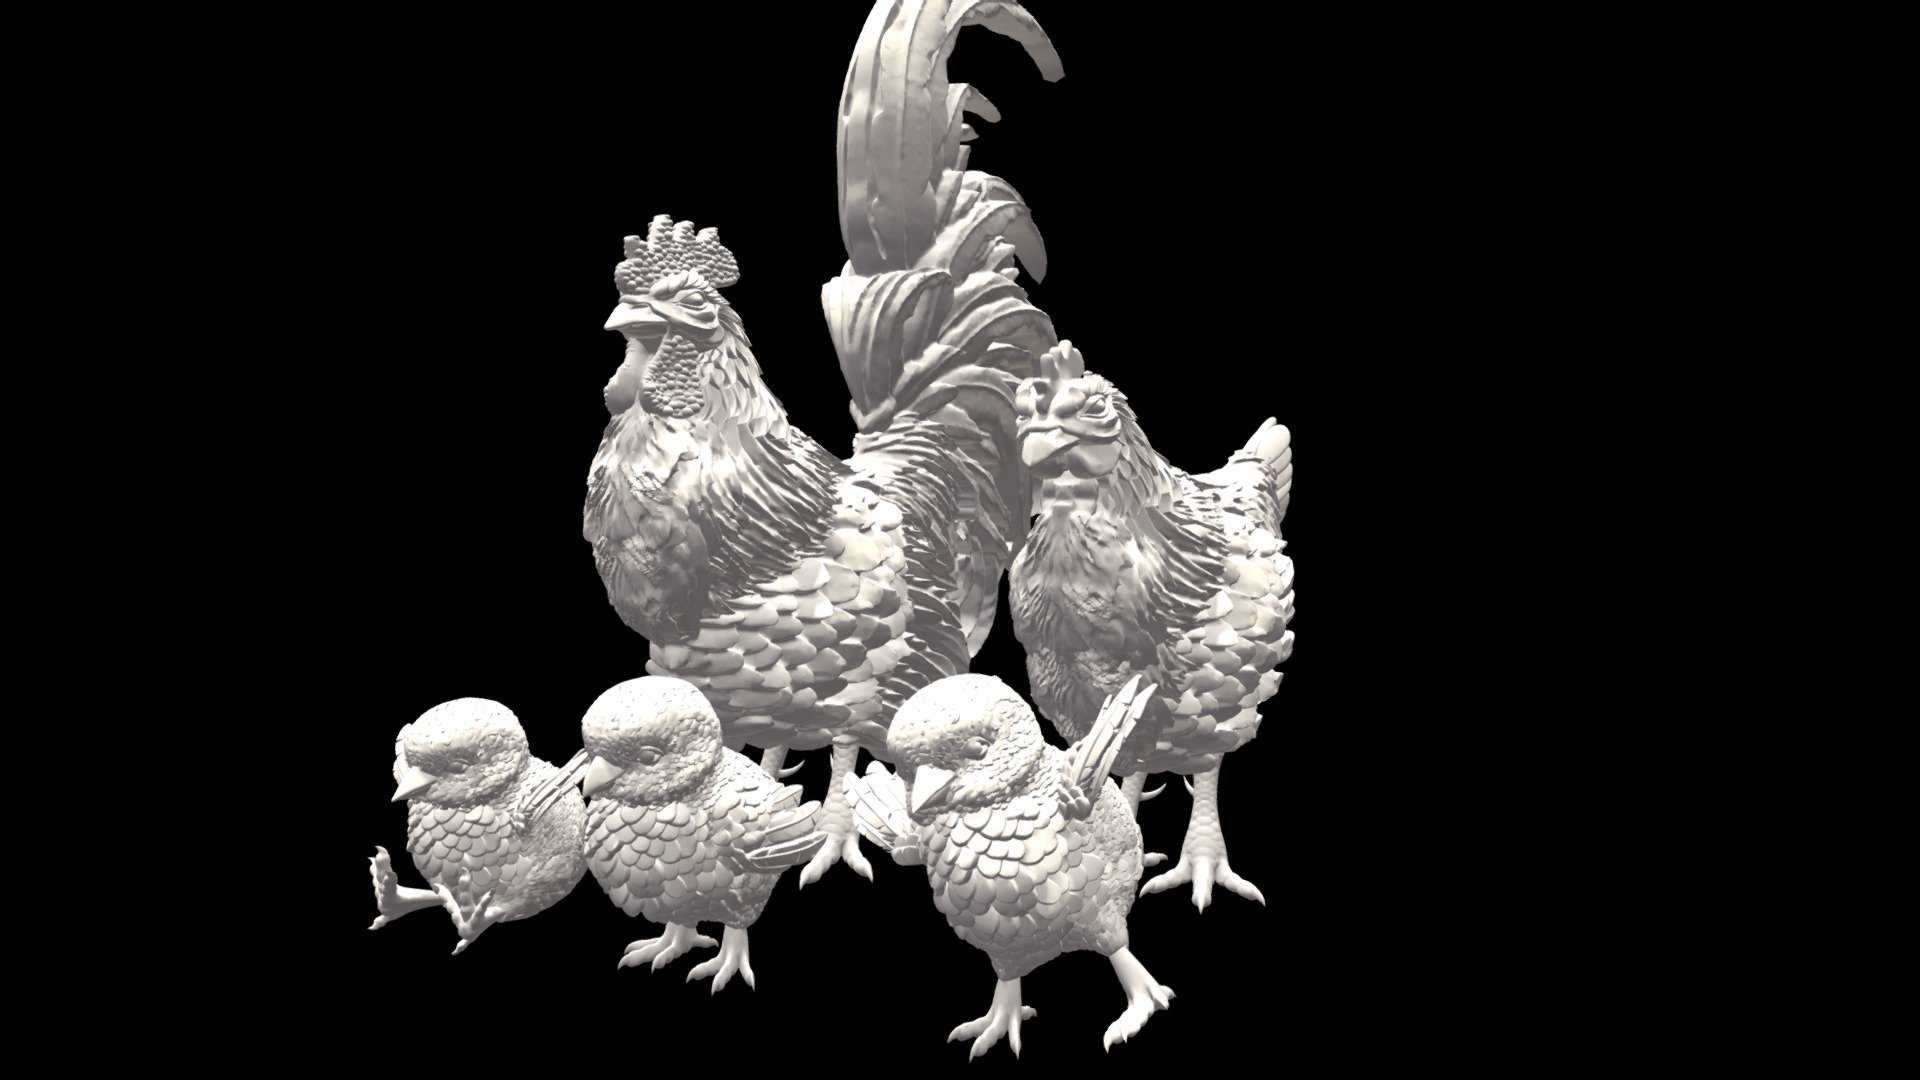 chicken rooster chicks
The format is OBJ, STL, Zbrush. Model for printing on a 3d printer 3d model